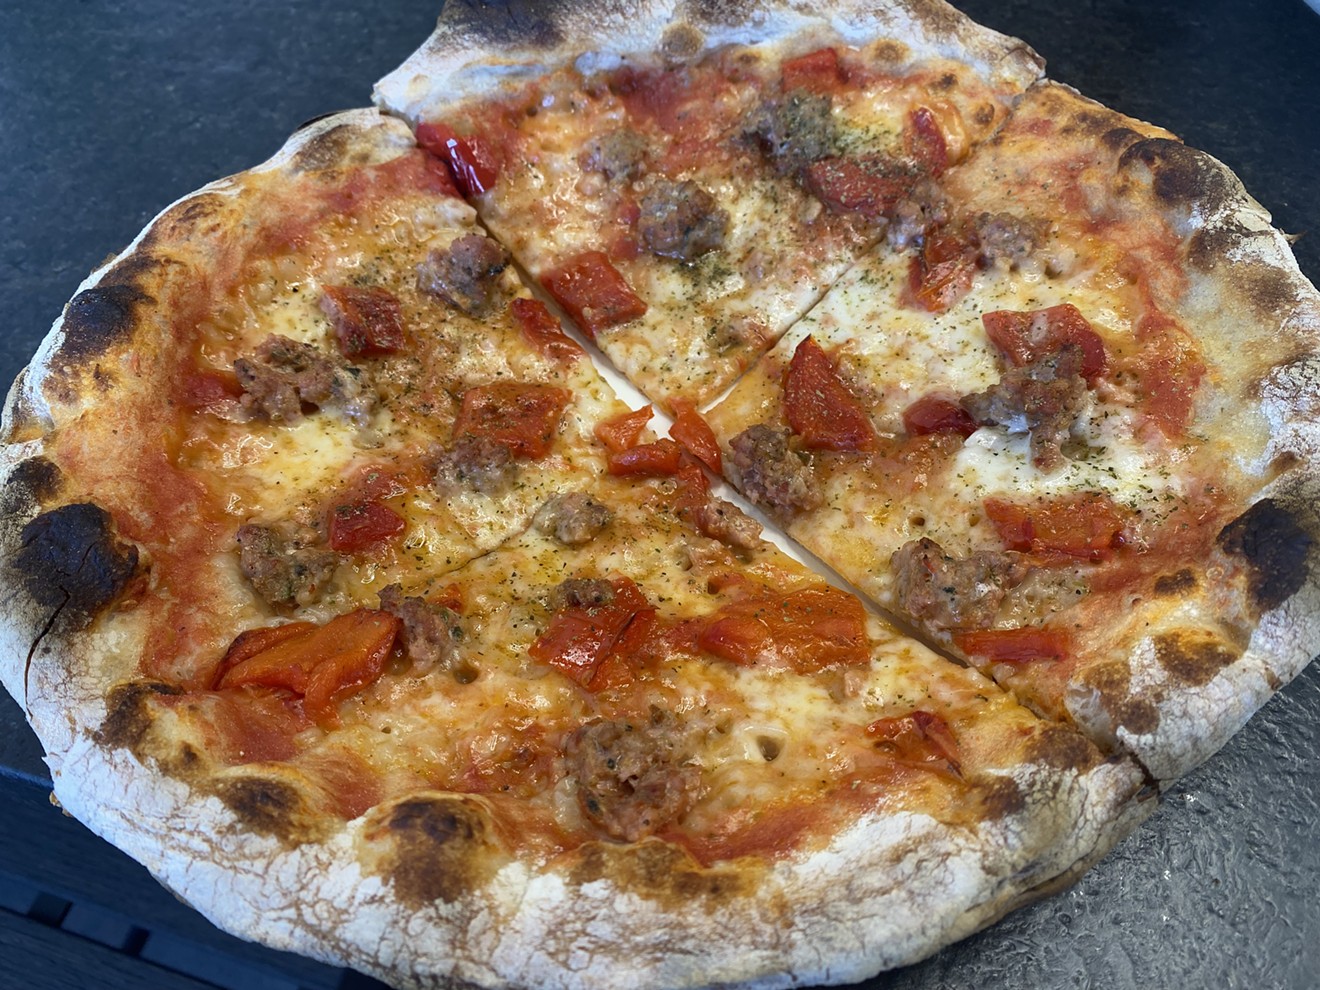 Salsiccia pizza is impossibly crispy and topped with Arcadia Meat Market's spicy Italian sausage at Source.